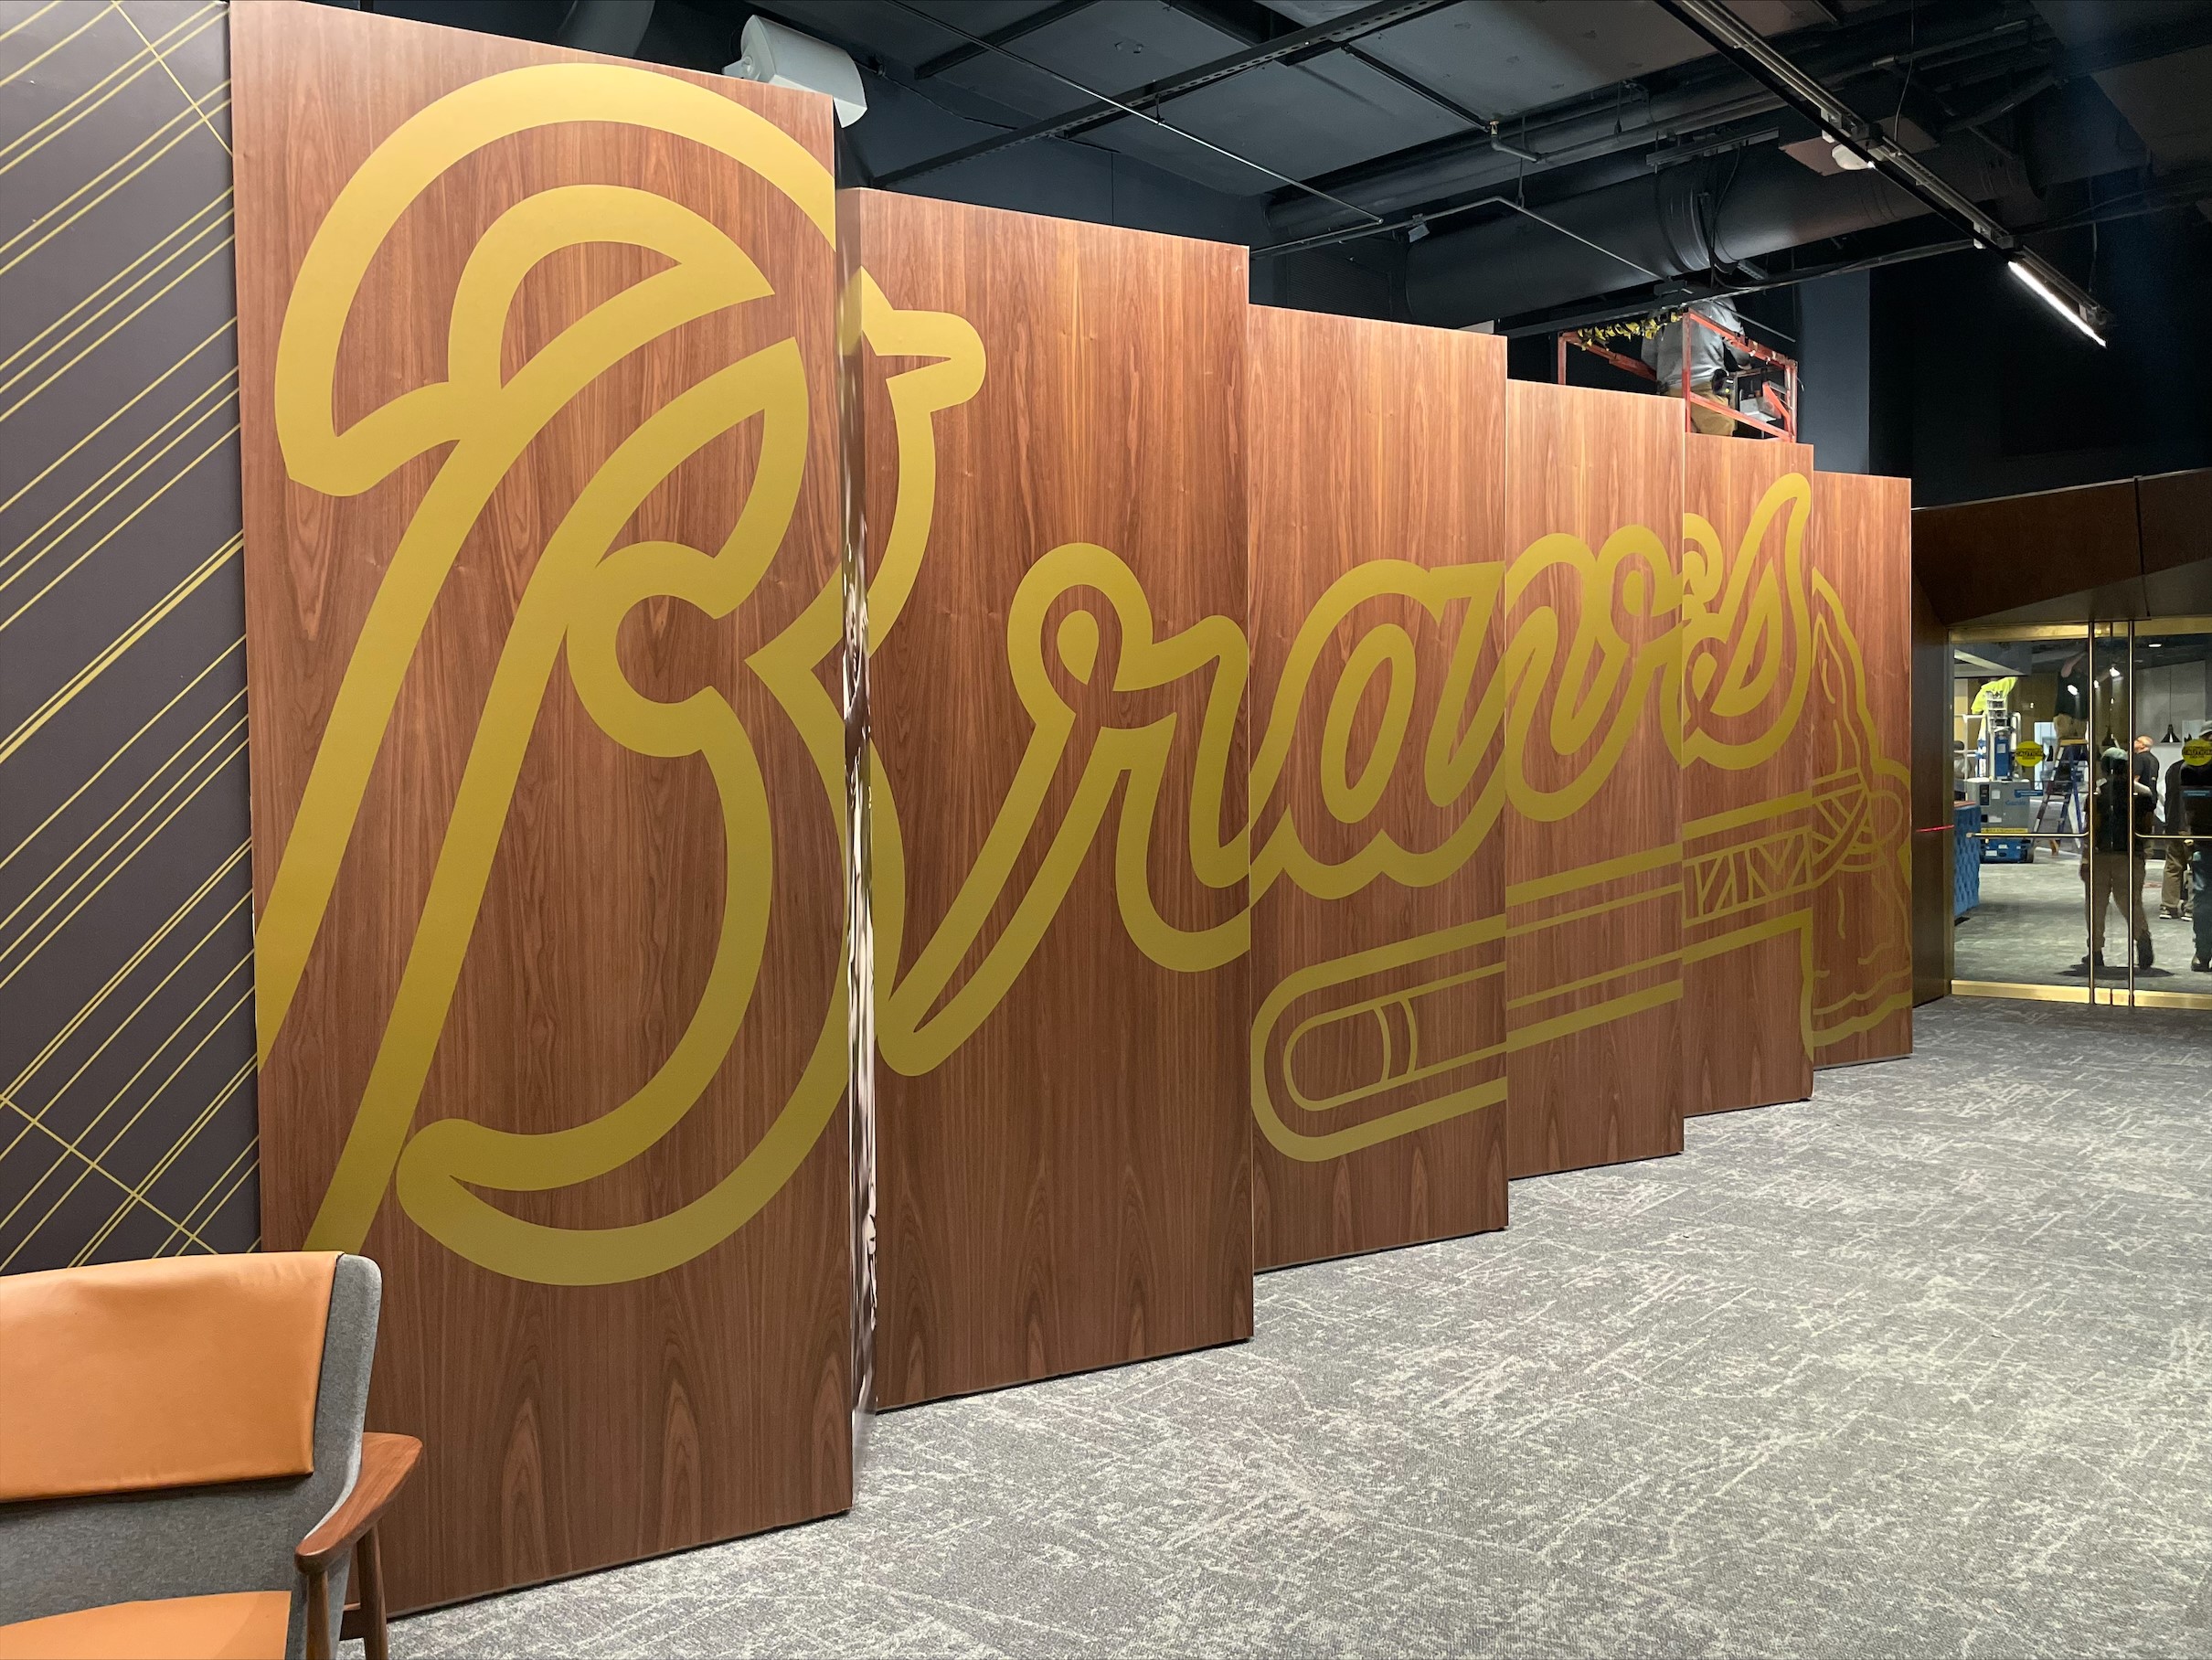 Braves Wood wall